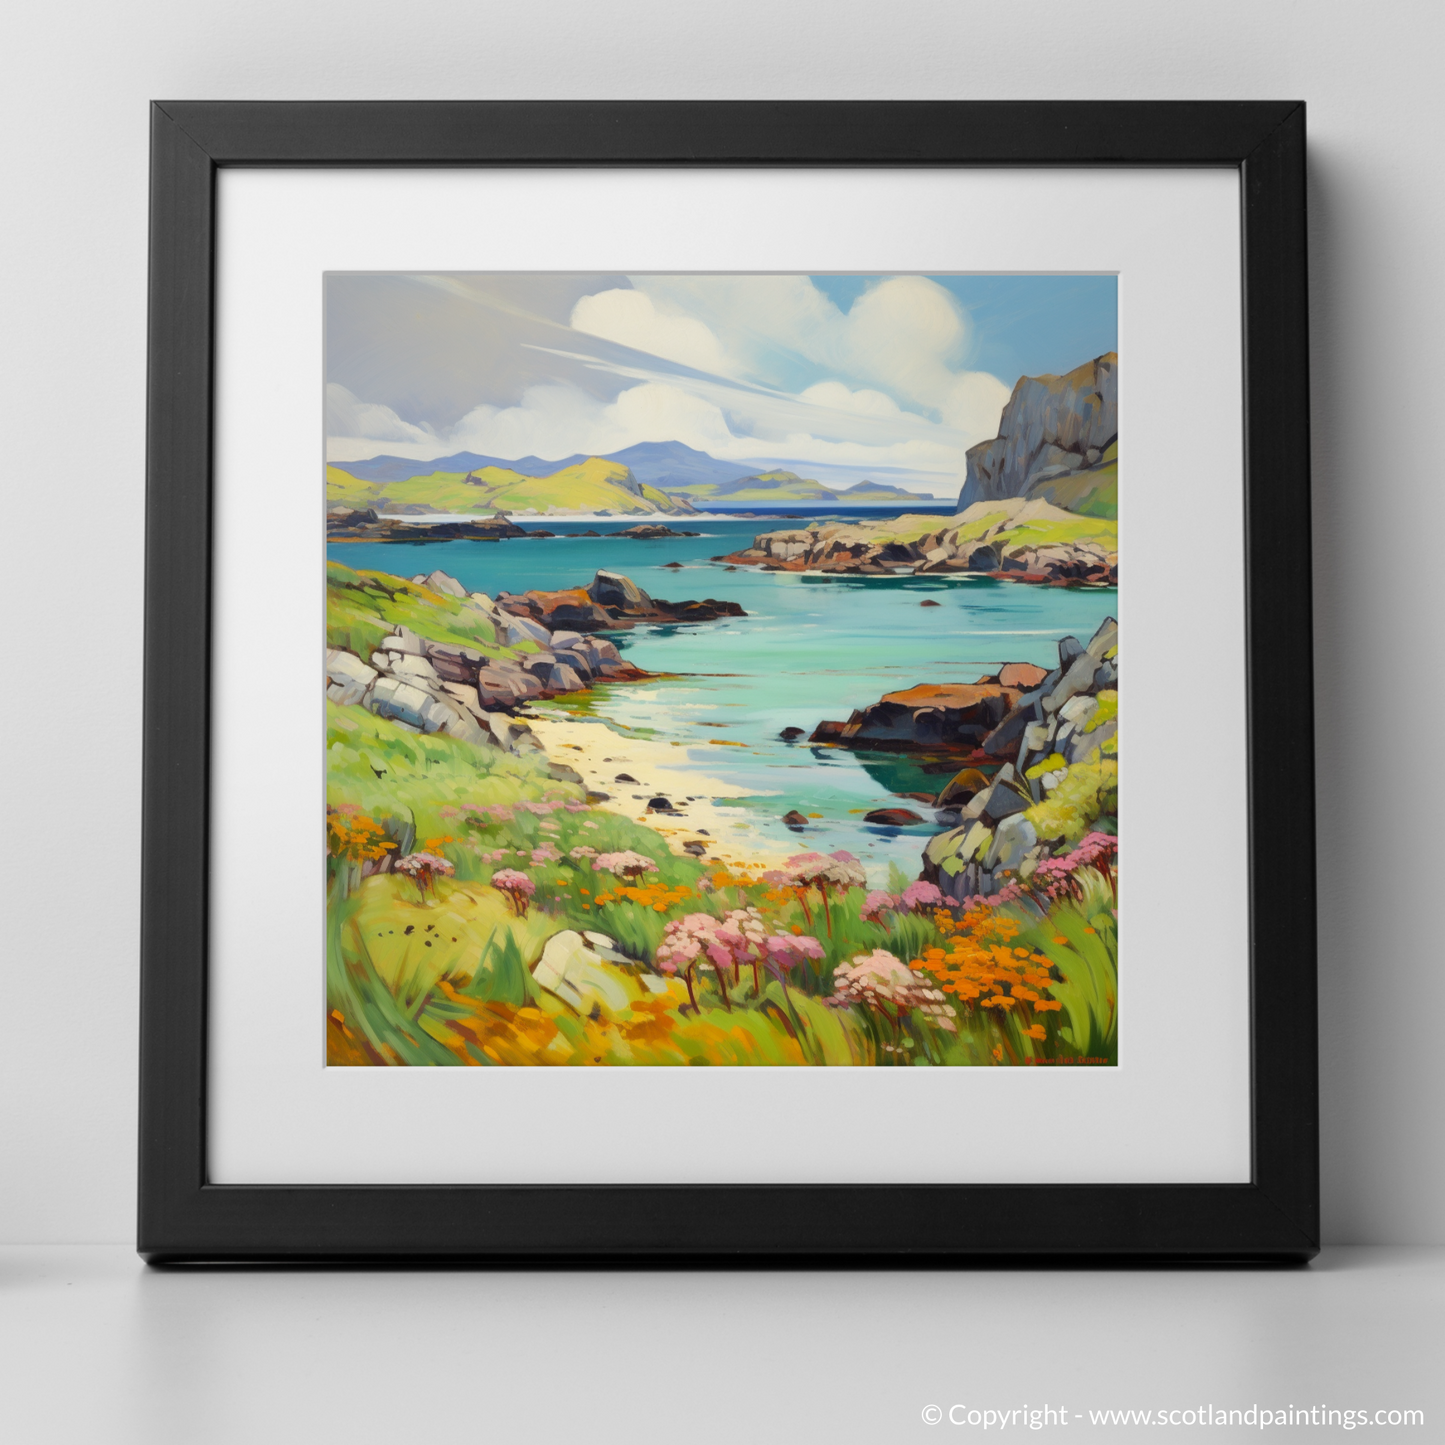 Art Print of Isle of Mull, Inner Hebrides in summer with a black frame